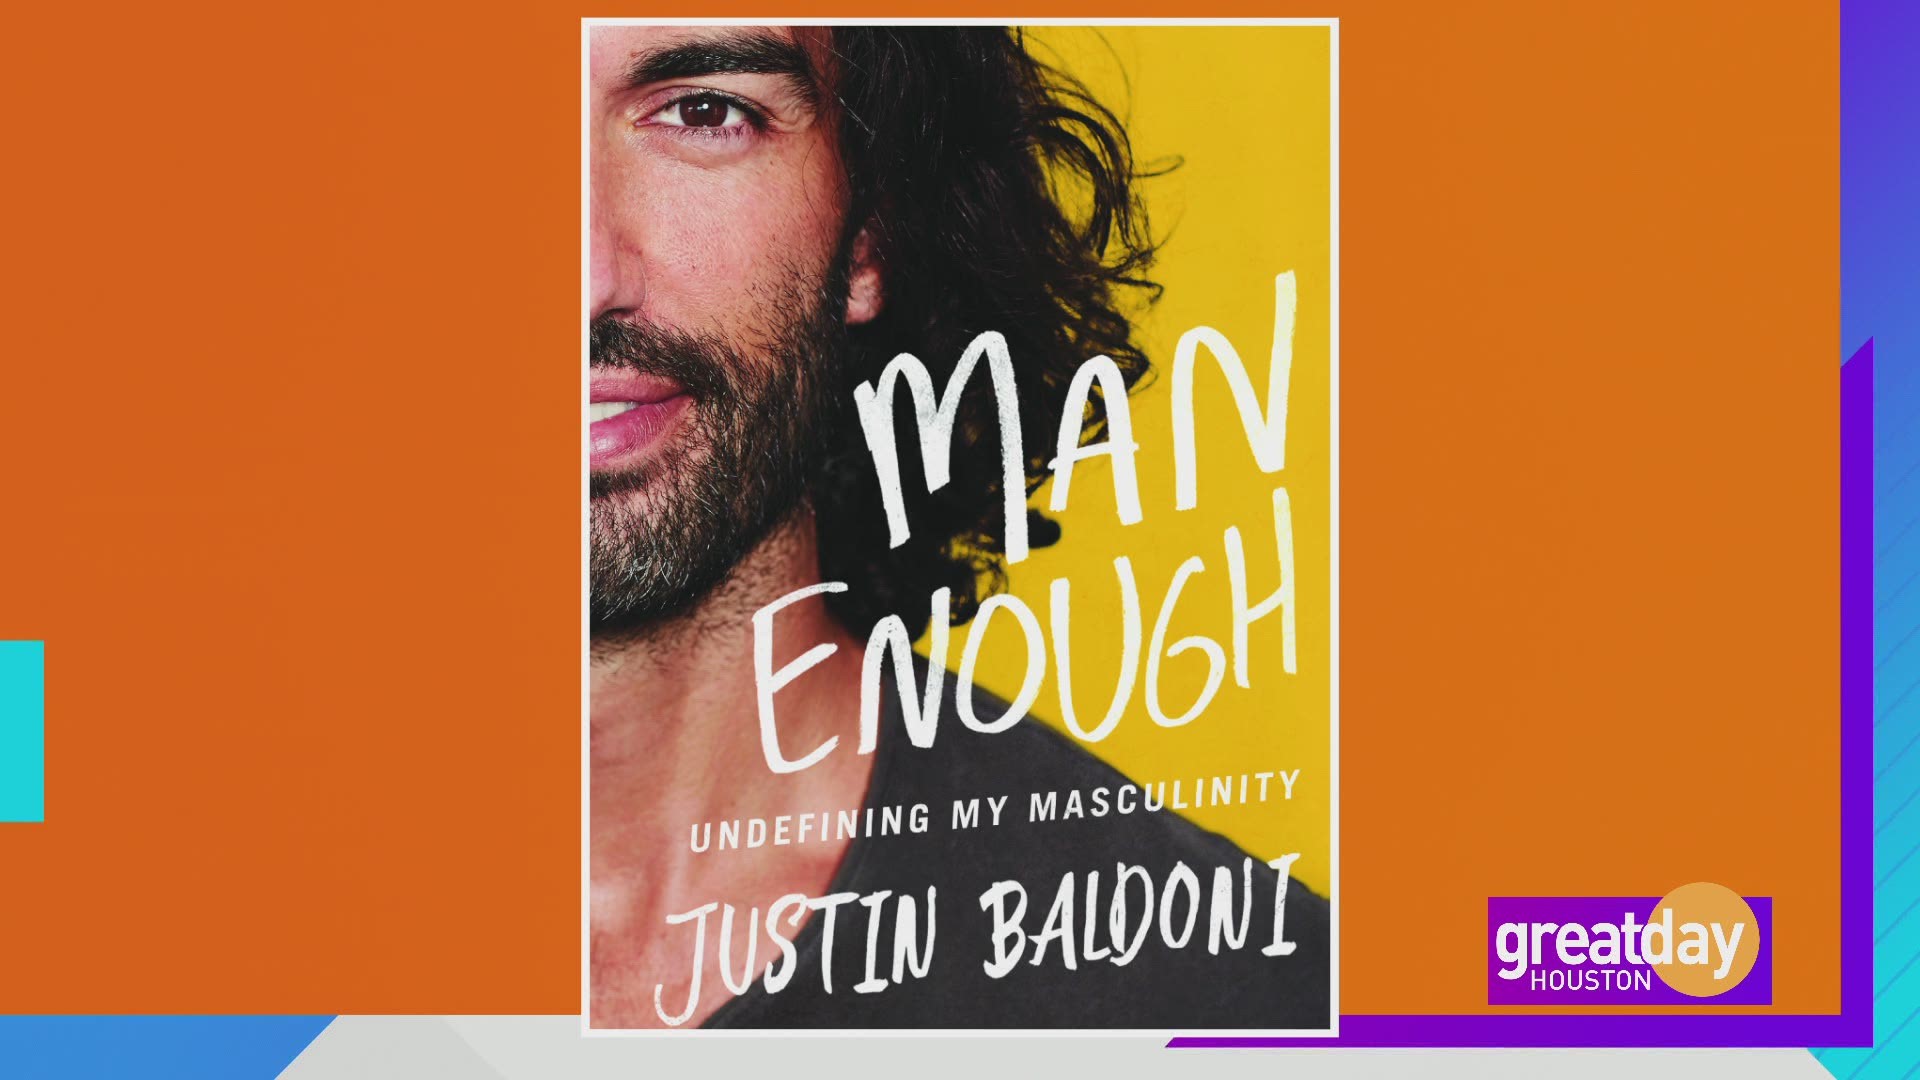 Justin Baldoni discusses his new book, "Man Enough: Undefining My Masculinity"